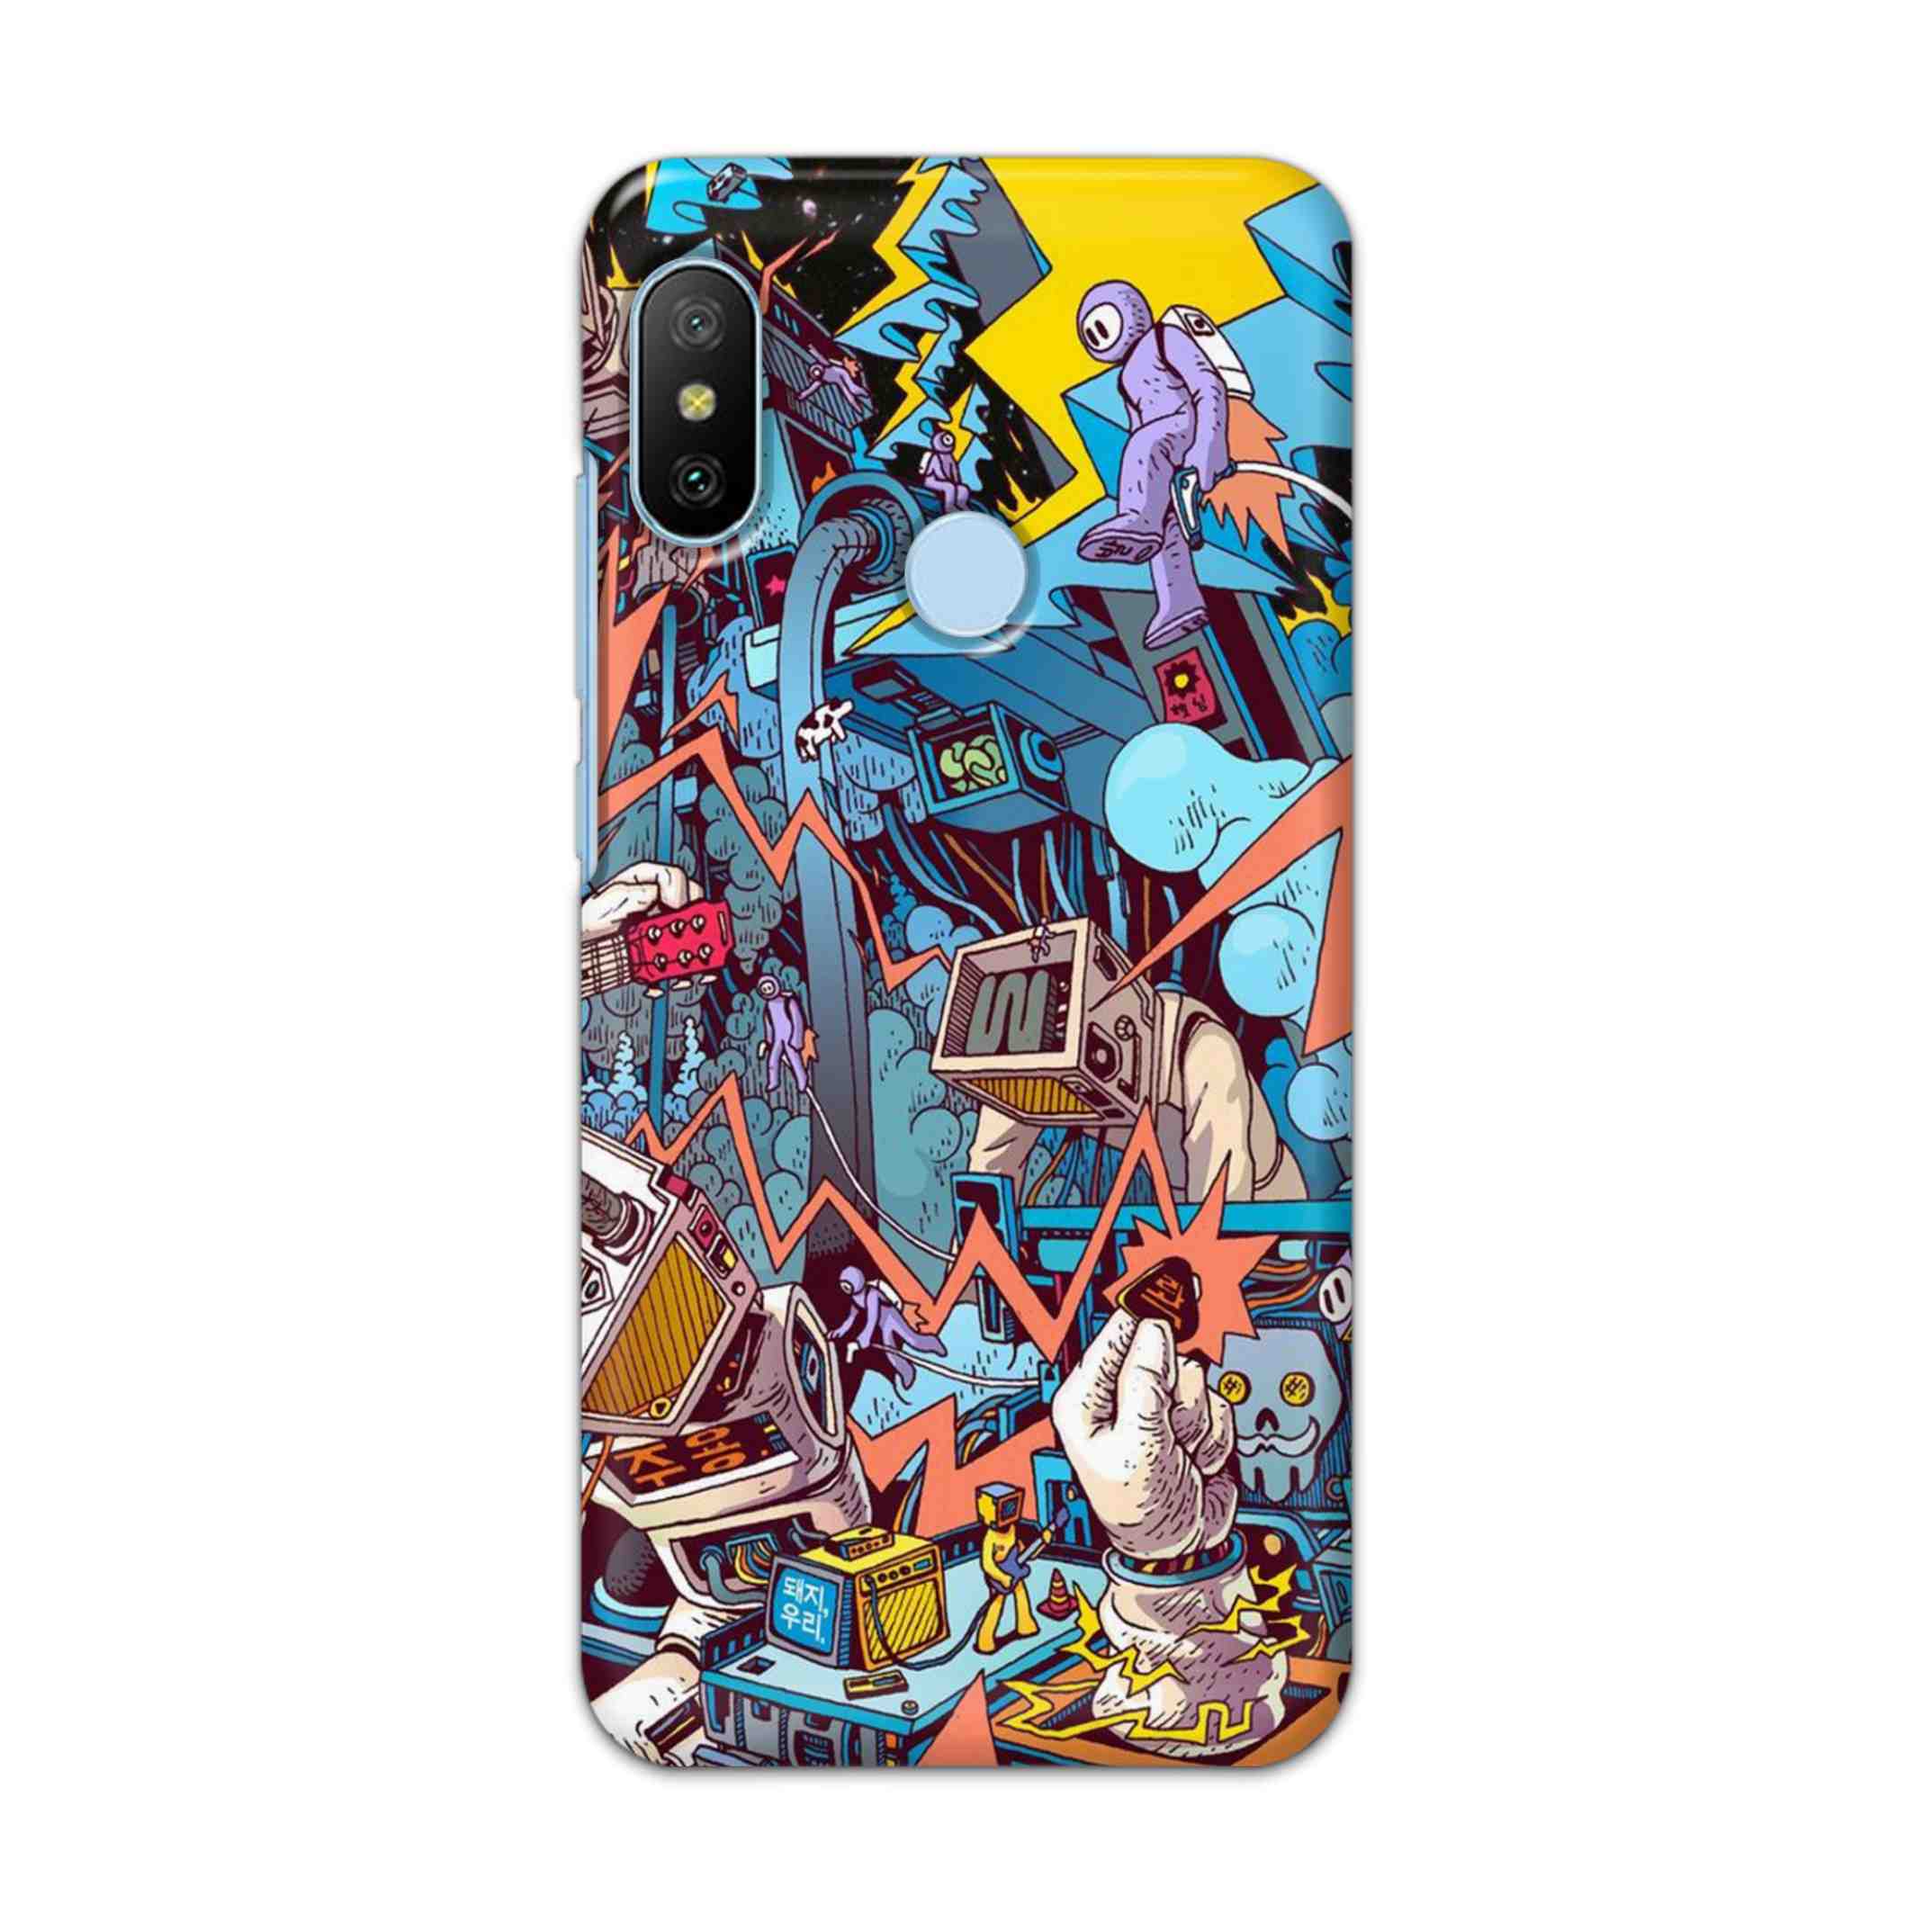 Buy Ofo Panic Hard Back Mobile Phone Case/Cover For Xiaomi Redmi 6 Pro Online